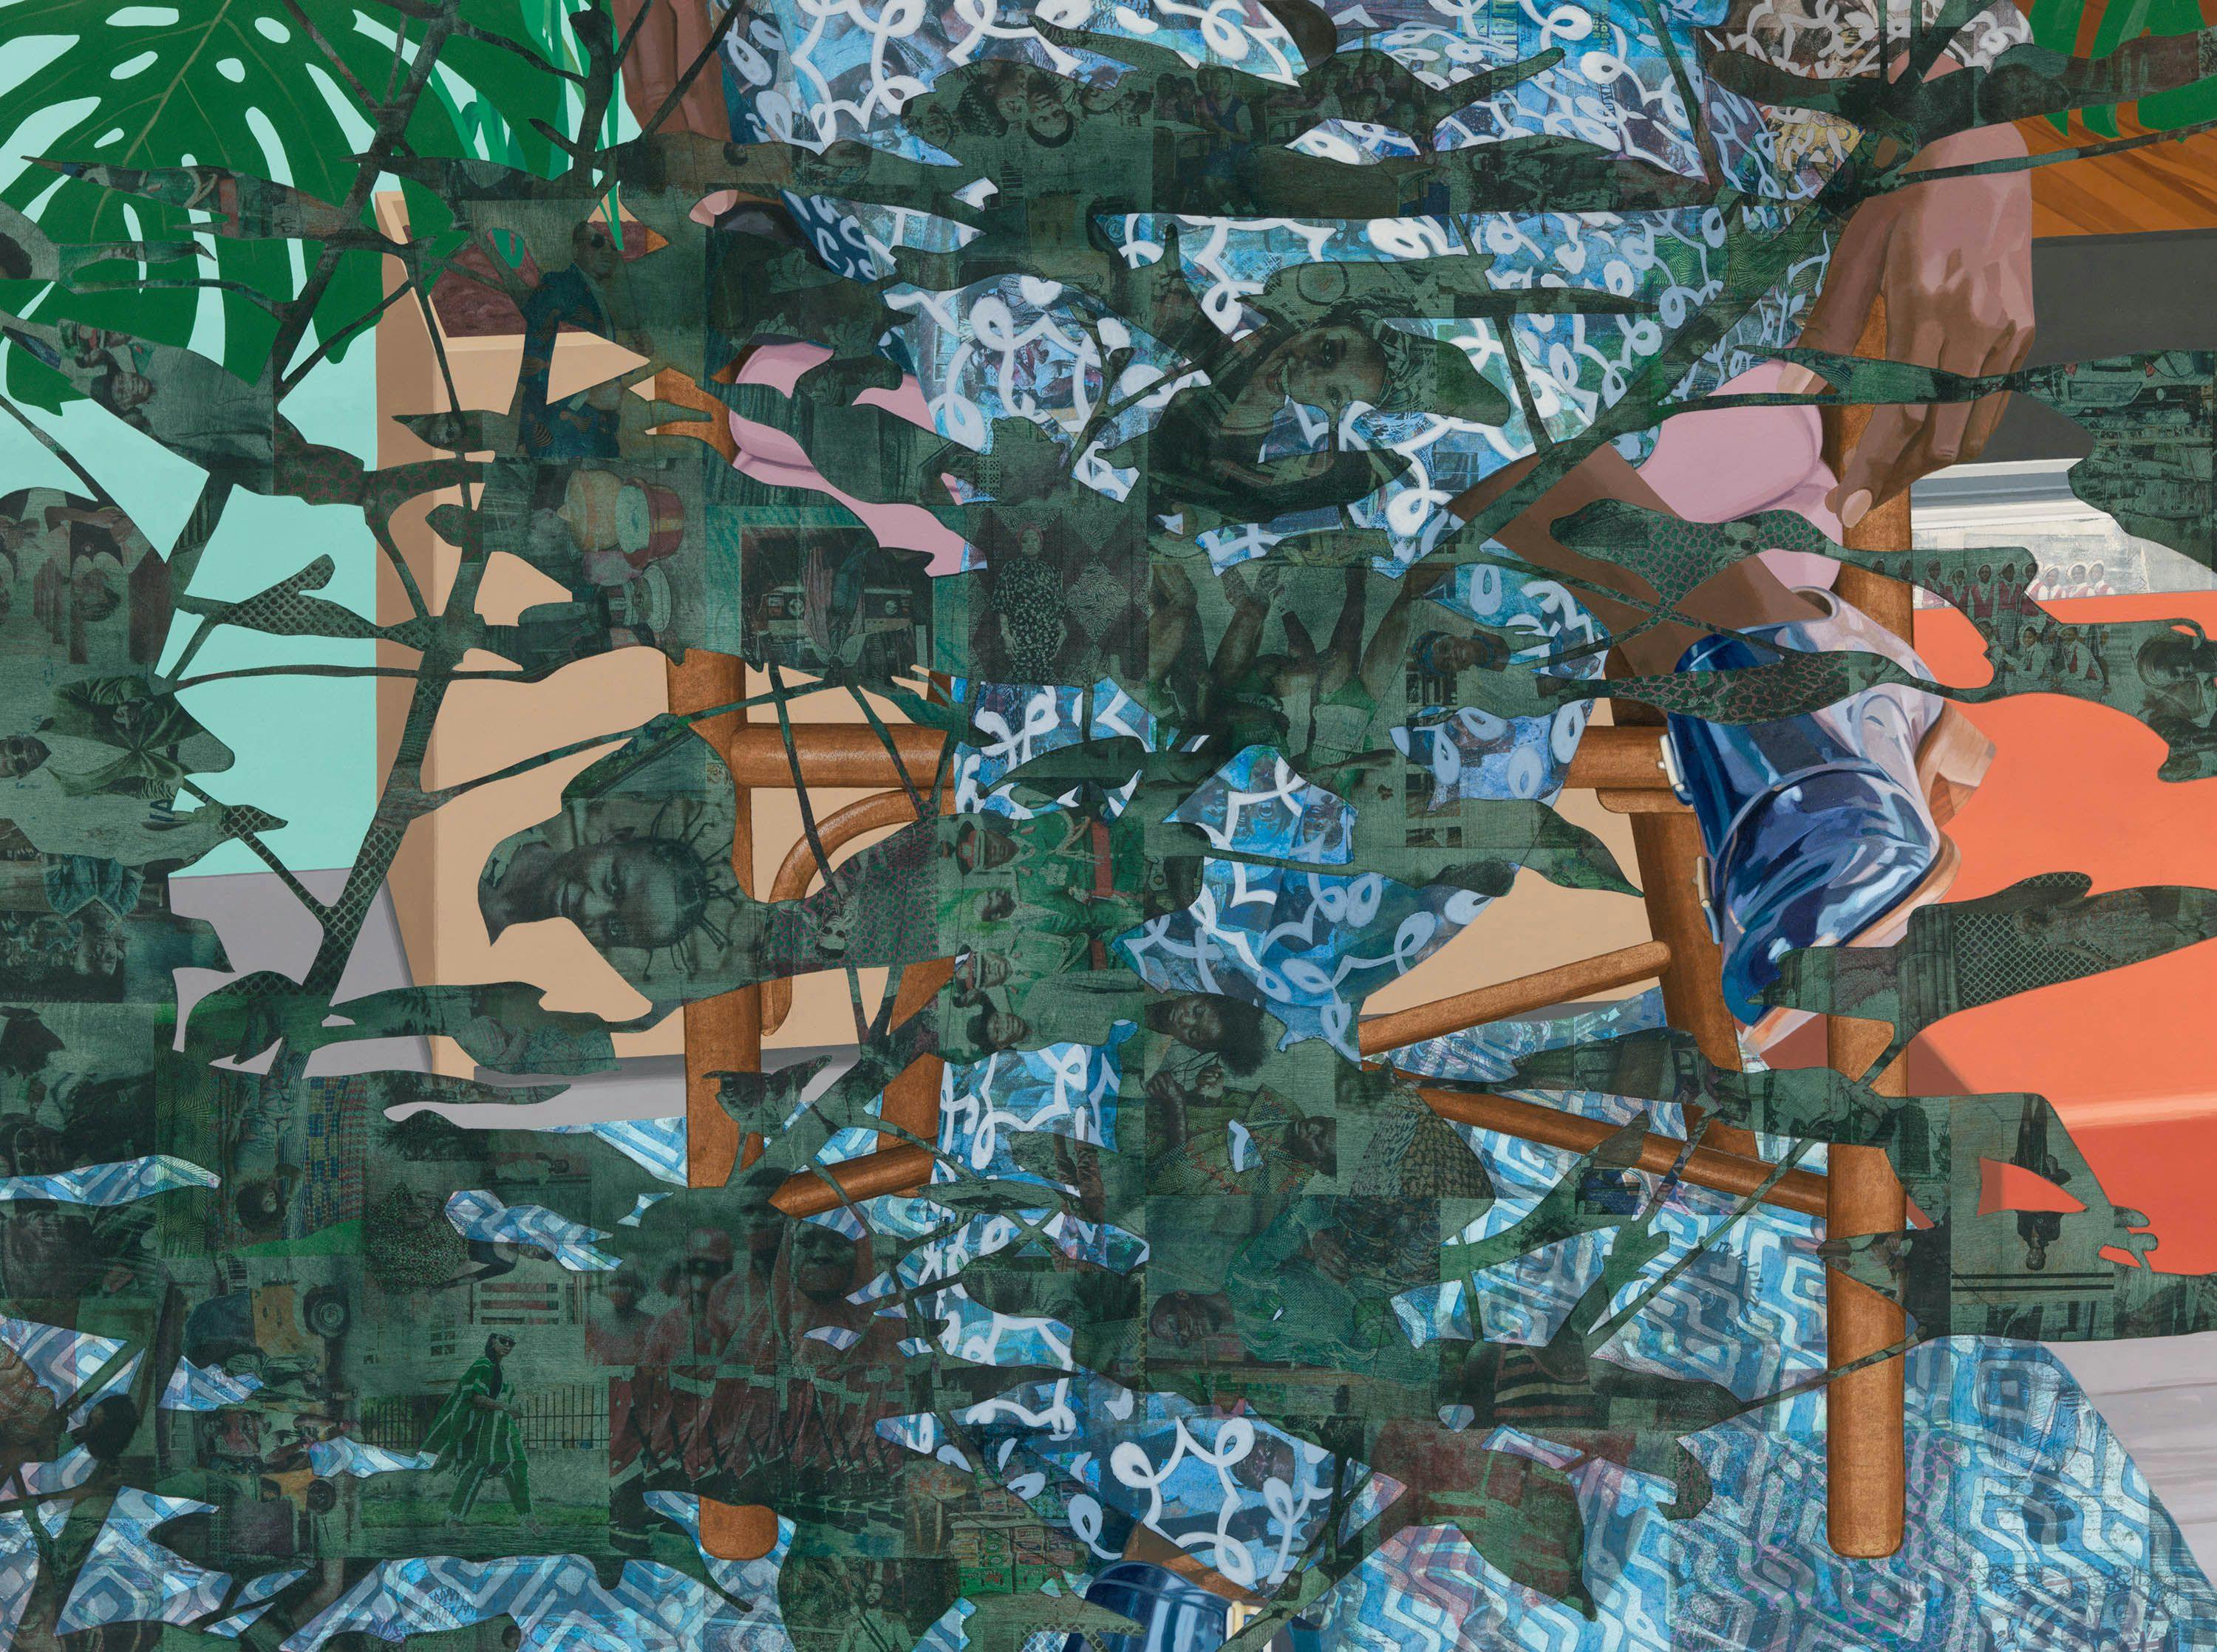 A detail from a work on paper by Njideka Akunyili Crosby, titled Still You Bloom in This Land of No Gardens, dated 2021.